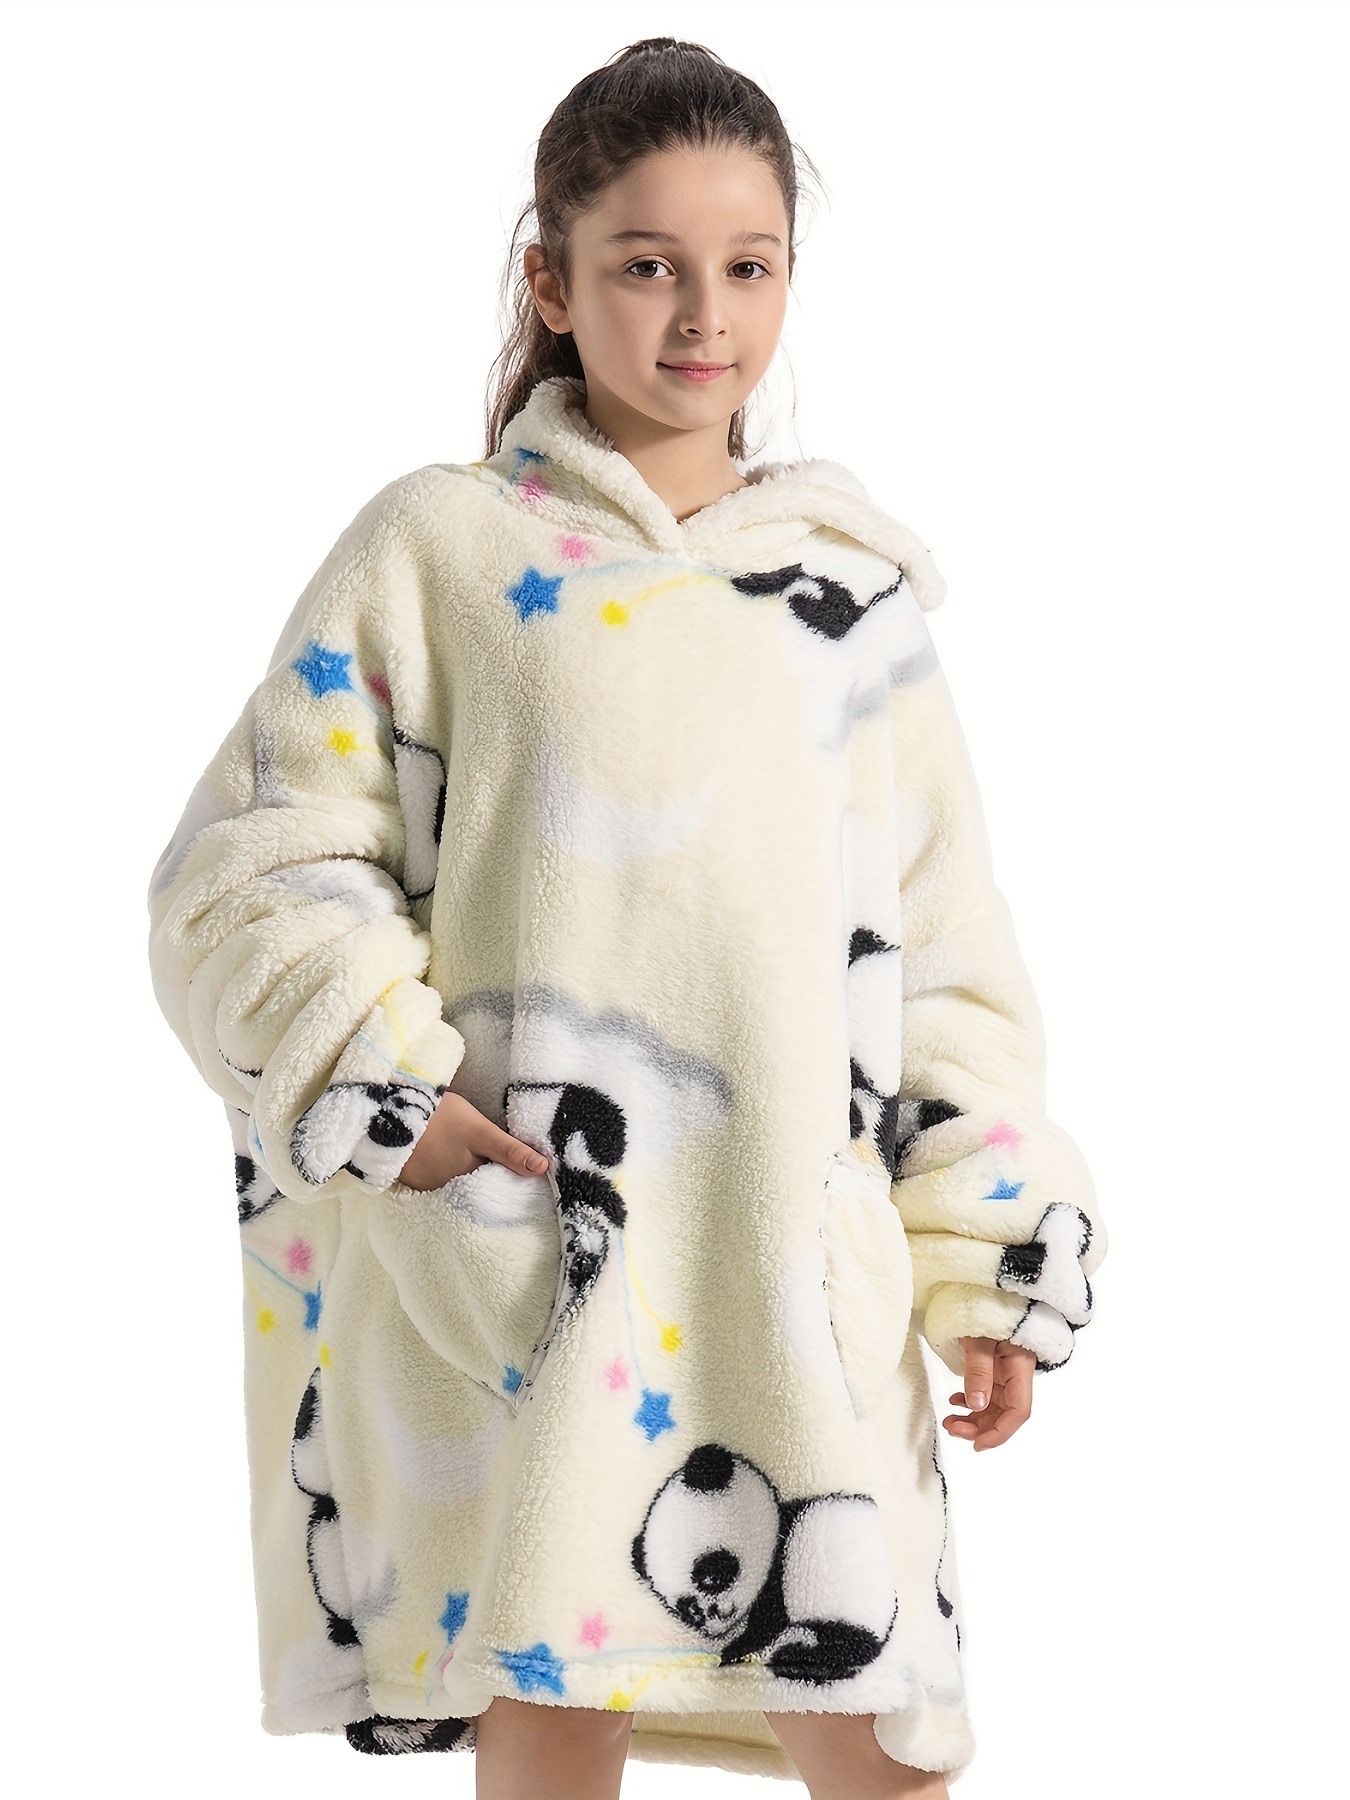 The Big Softy - Adult Onesie Pajamas for Women, Teddy Fleece Womens Onesie Pajamas, Fuzzy Pajama Onesies for Women, Teens Pjs